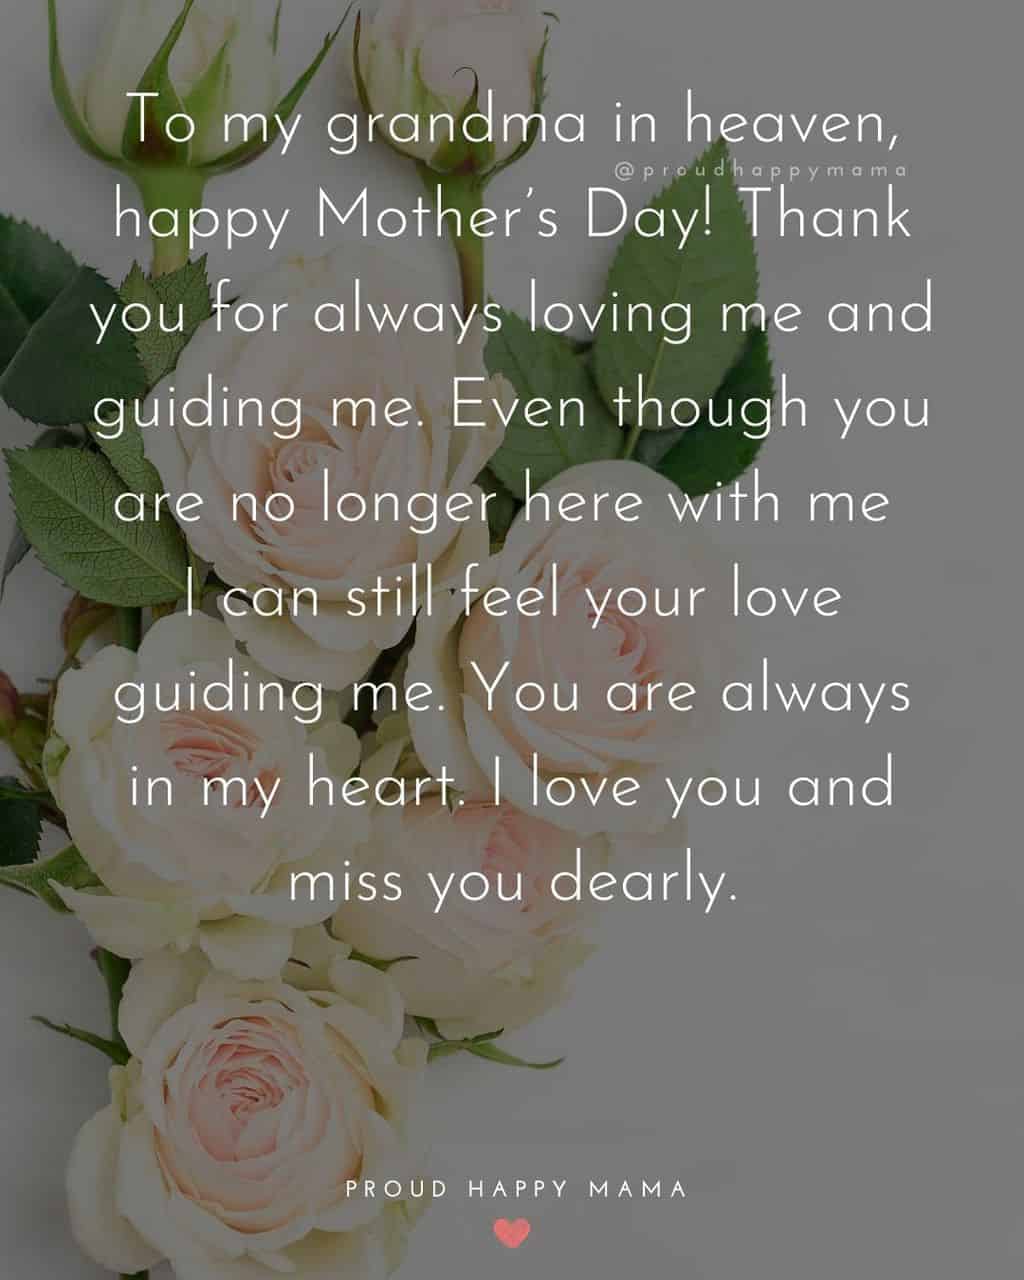 Happy Mothers Day Quotes To Grandma - To my grandma in heaven, happy Mother’s Day! Thank you for always loving me